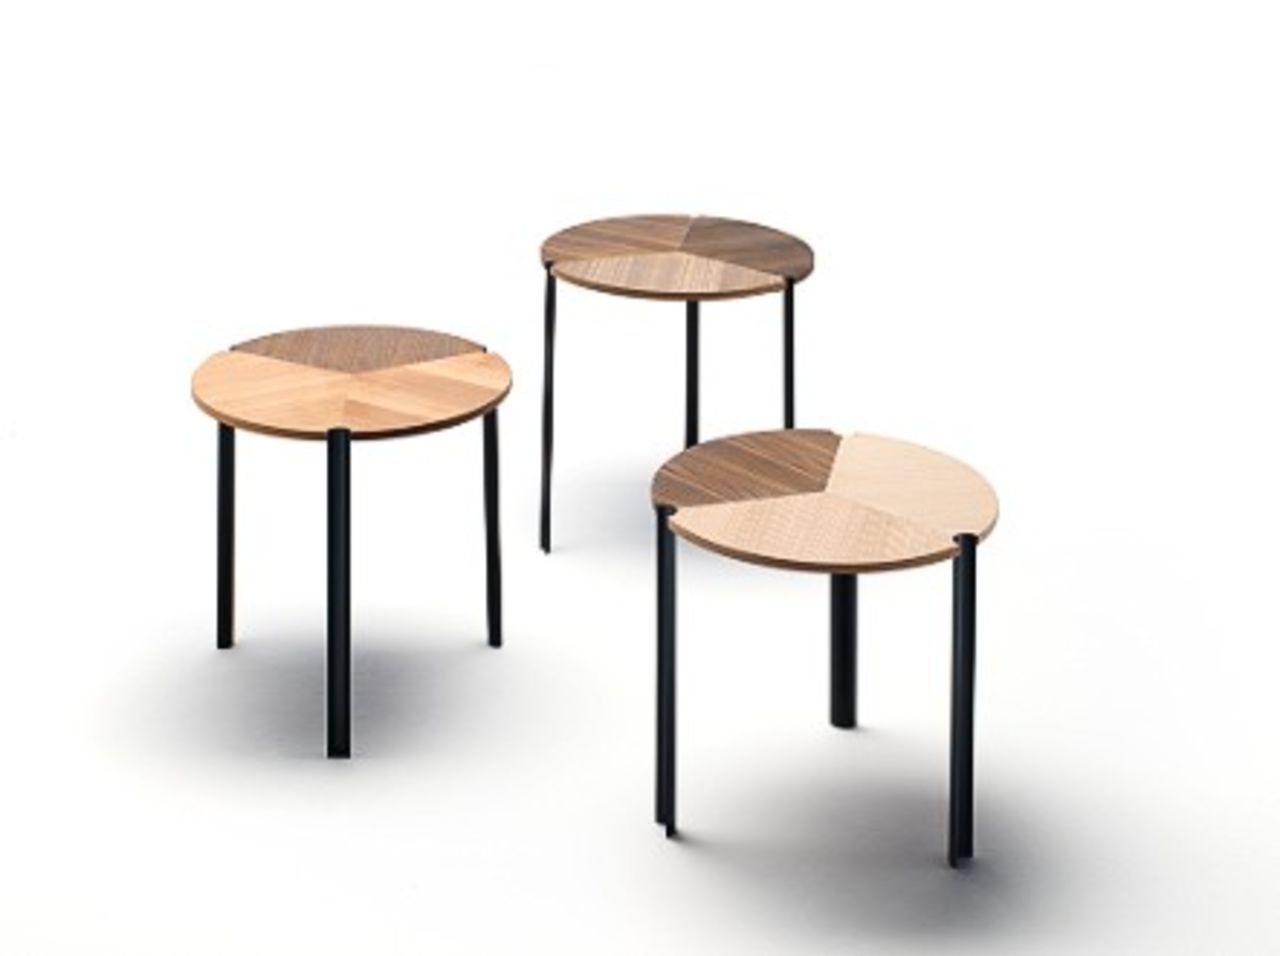 These stackable modular wooden coffee tables, designed by David Lopez Quincoces, were on display in Milan - (Courtesy Living Divani)